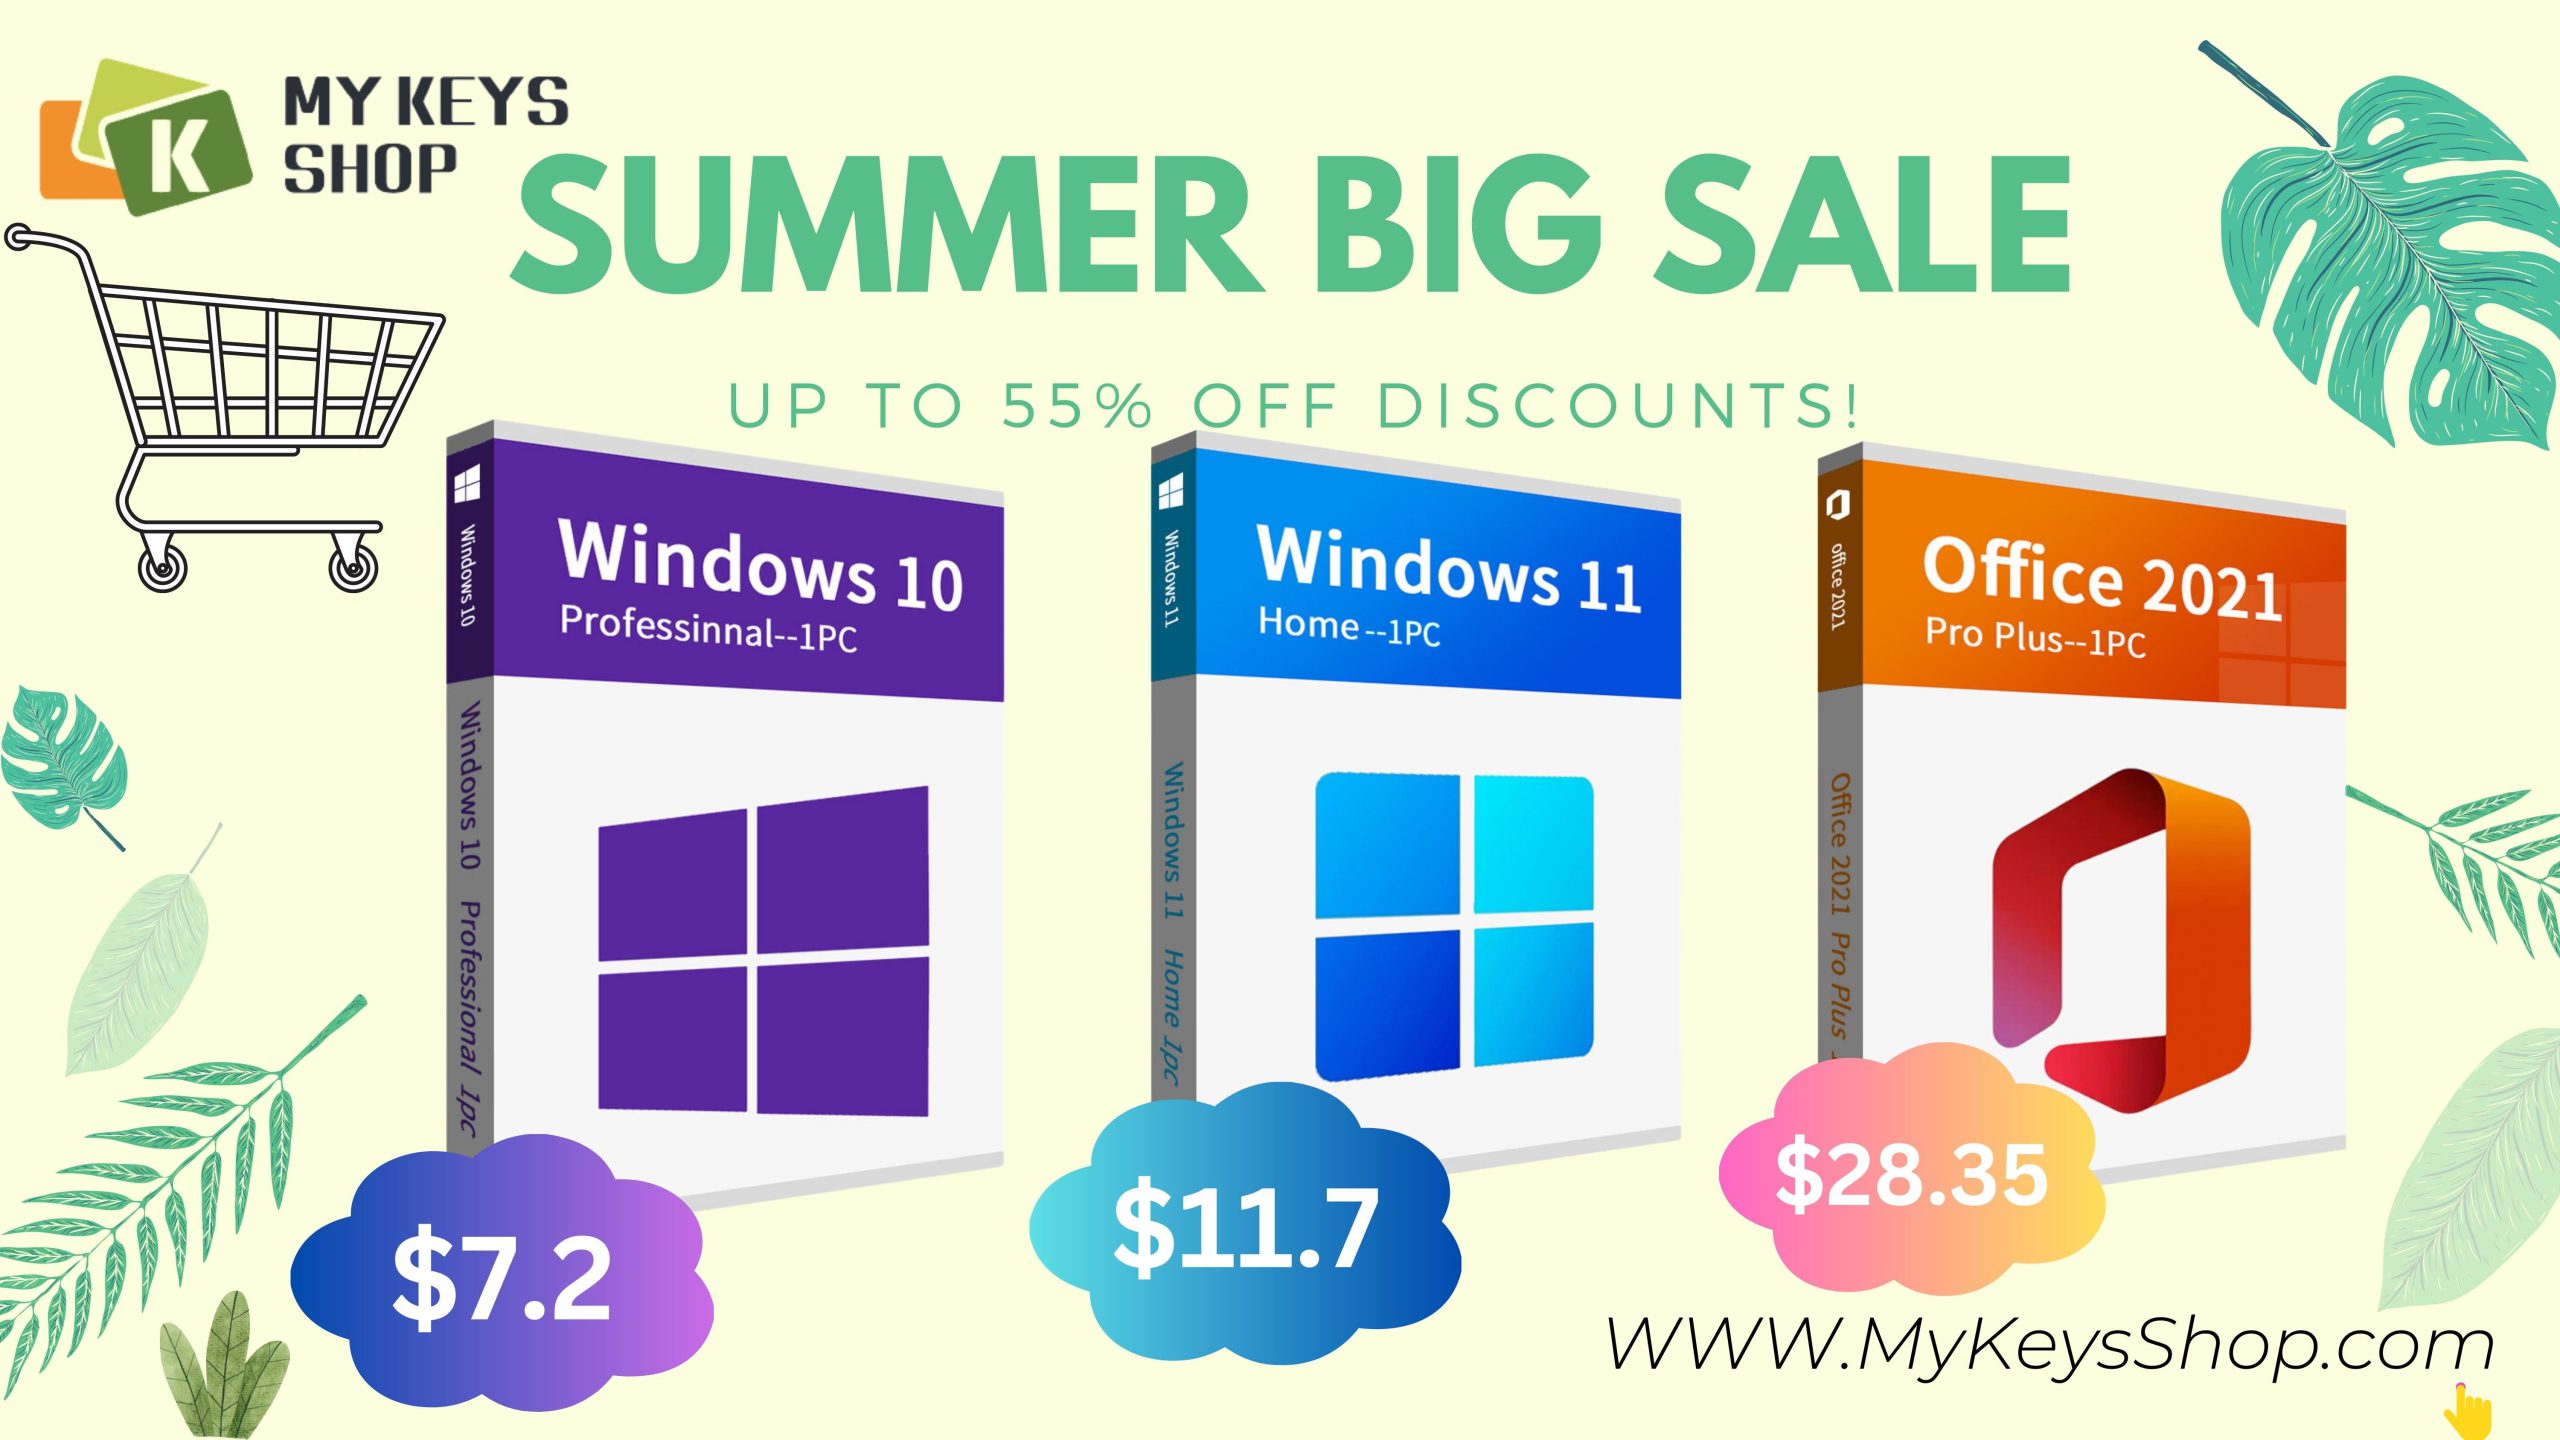 Upgrade your Software: Summer Sale on Affordable Windows and Office Keys at Mykeysshop!